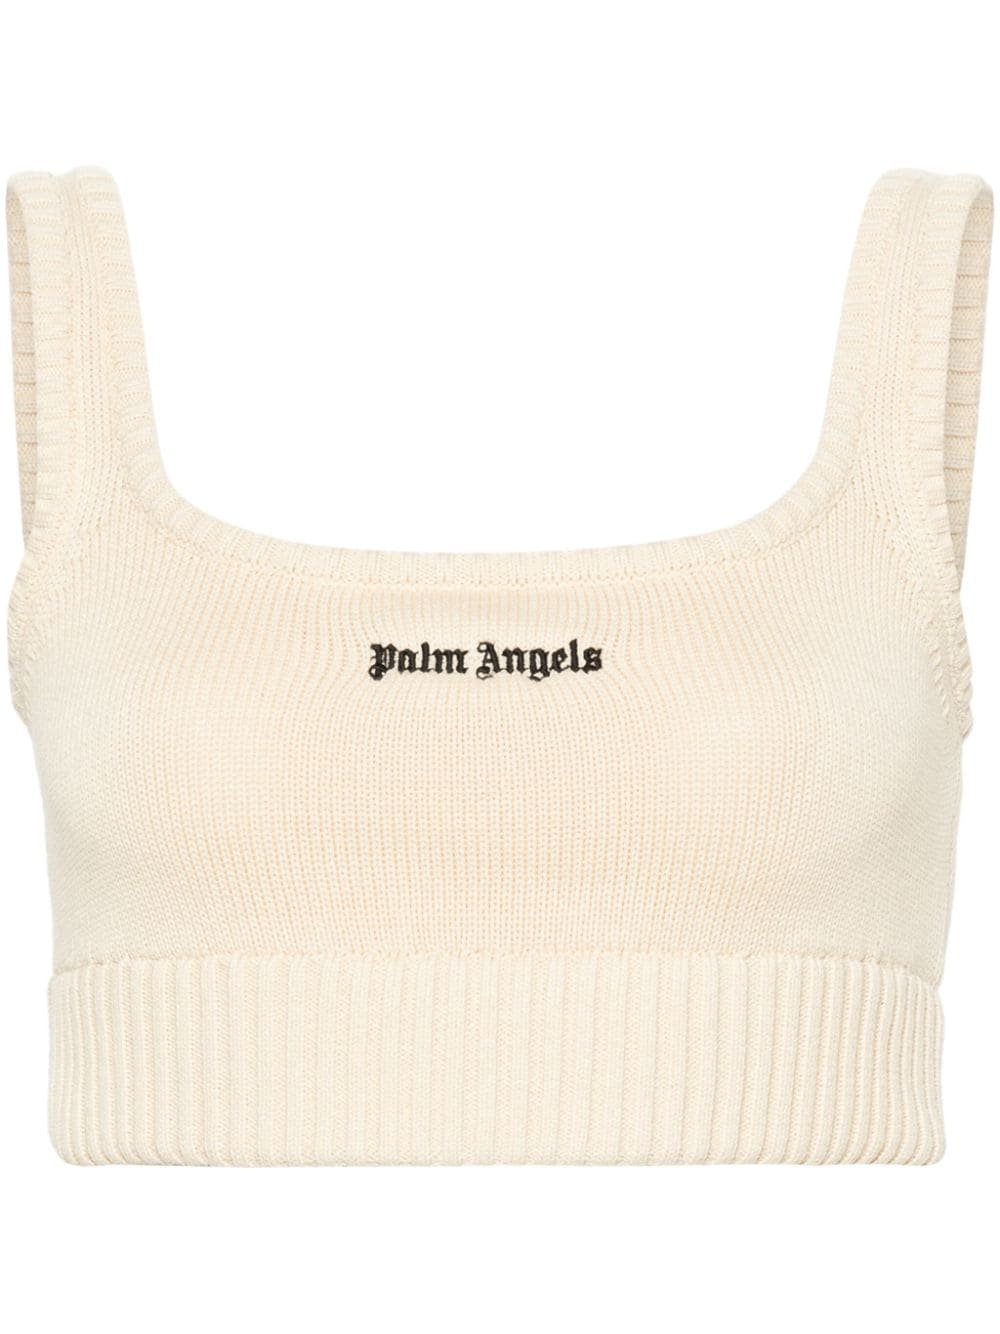 embroidered-logo knit tank top-0